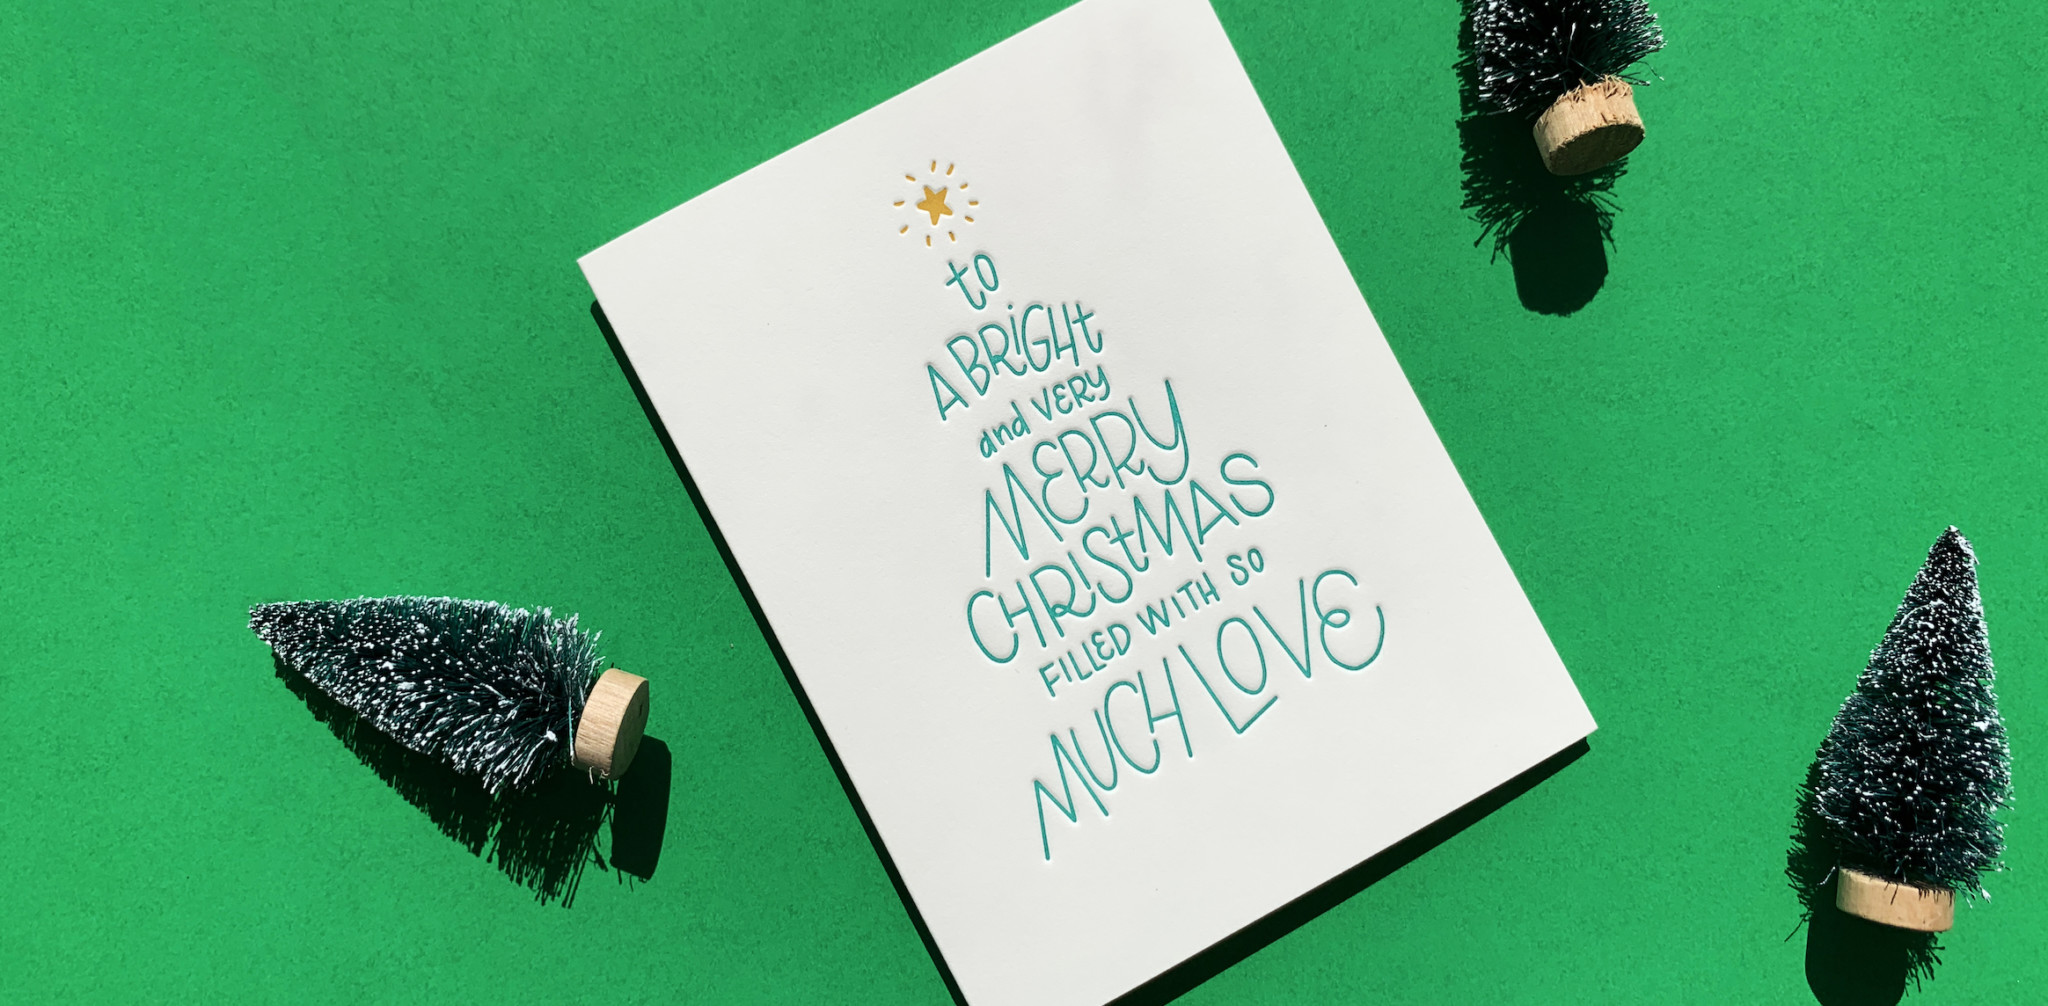 Greeting card reads to a bright and merry christmas filled with so much love.